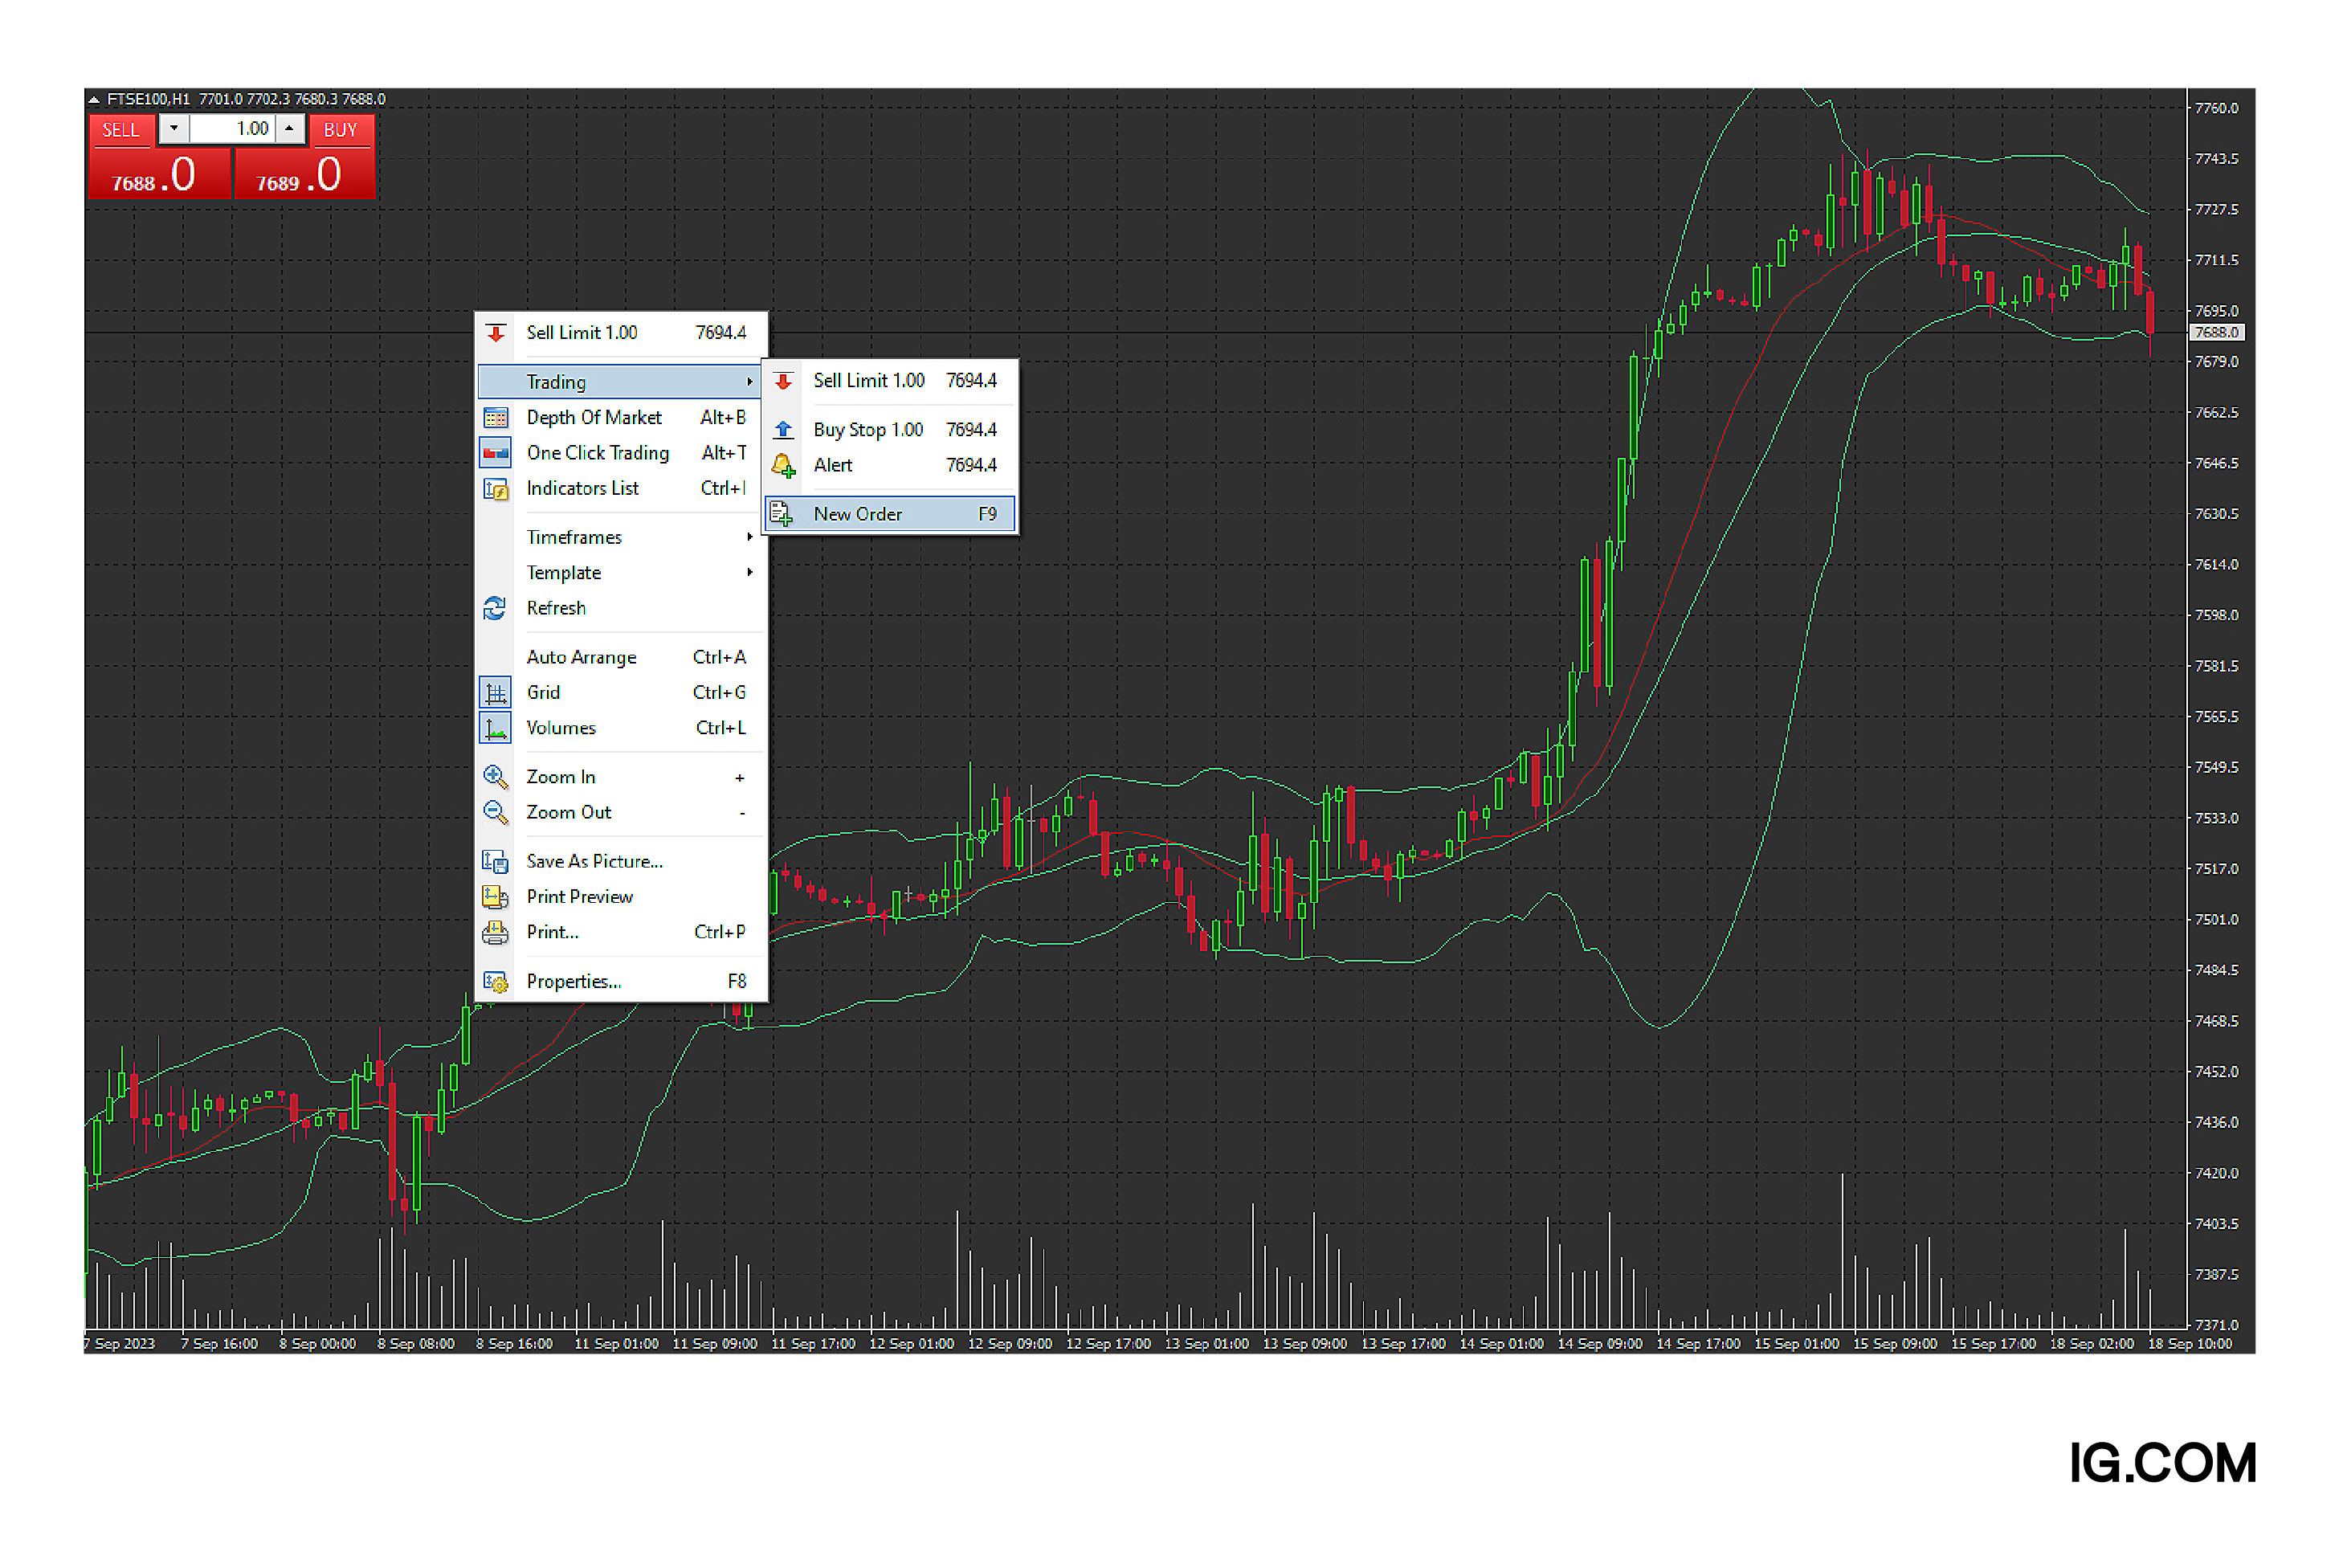 Screenshot of the MyIG trading platform showing how to create a spread betting or CFD trading account on our platform